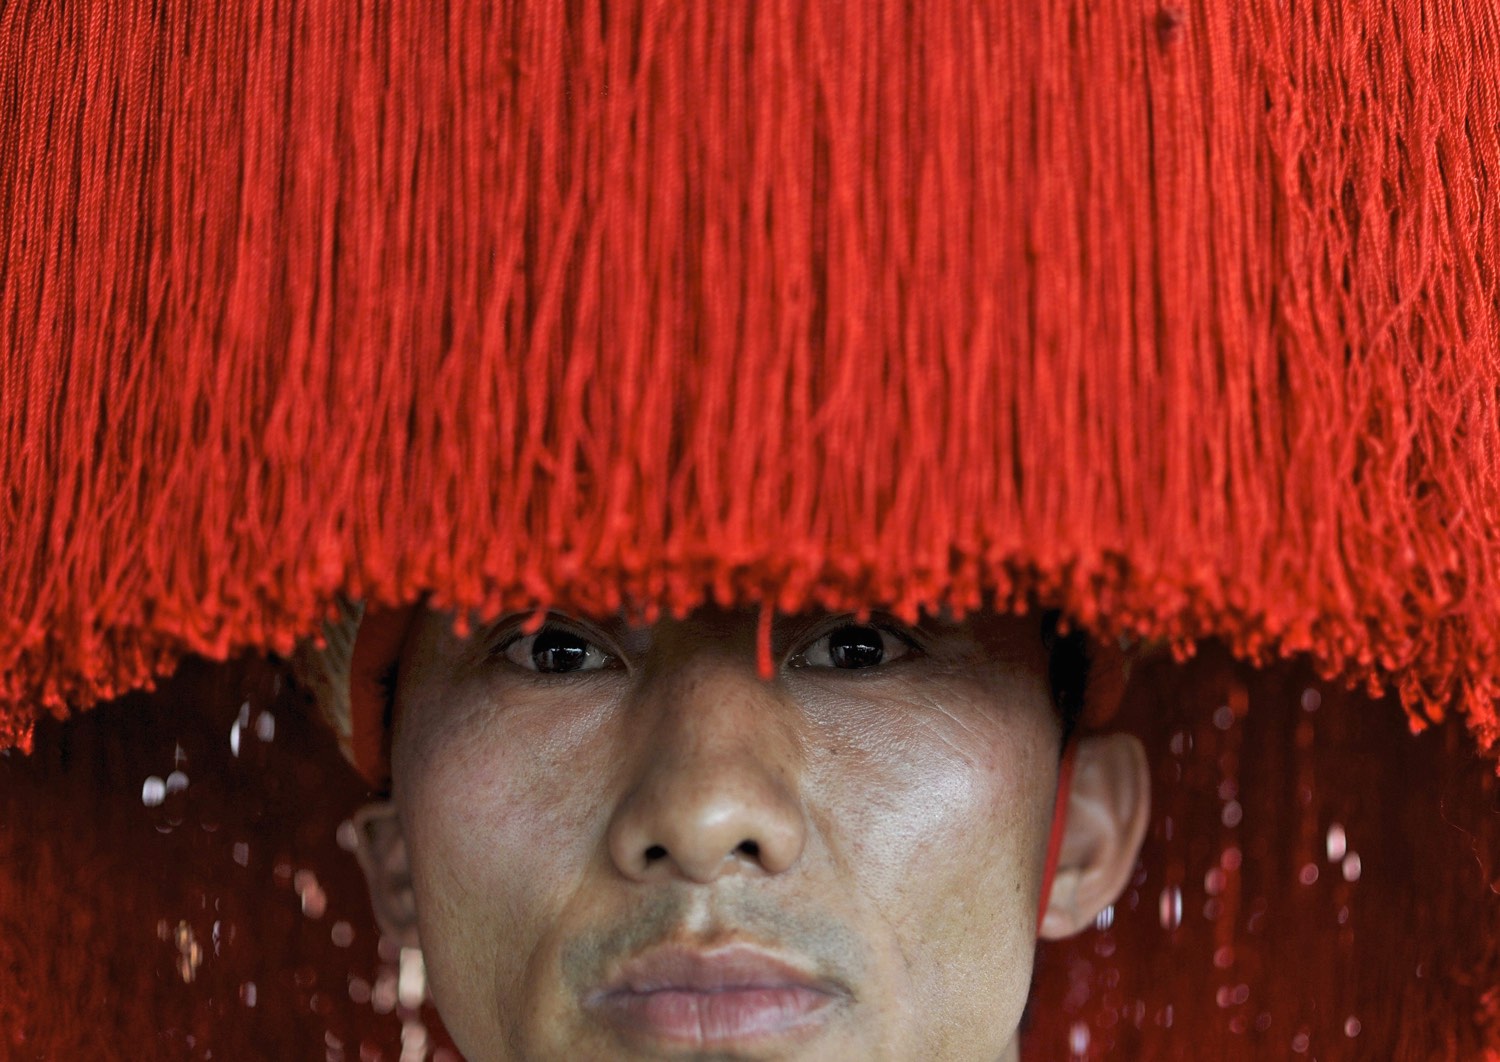 A Tibetan exile, wearing a traditional headdress, attends the Jangchup Lamrim teachings conducted by the exiled Tibetan spiritual leader the Dalai Lama (unseen) at the Gaden Jangtse Thoesam Norling Monastery at Mundgod in the southern Indian state of Karnataka December 26, 2014. REUTERS/Abhishek N. Chinnappa (INDIA - Tags: RELIGION SOCIETY TPX IMAGES OF THE DAY) - RTR4JAMX